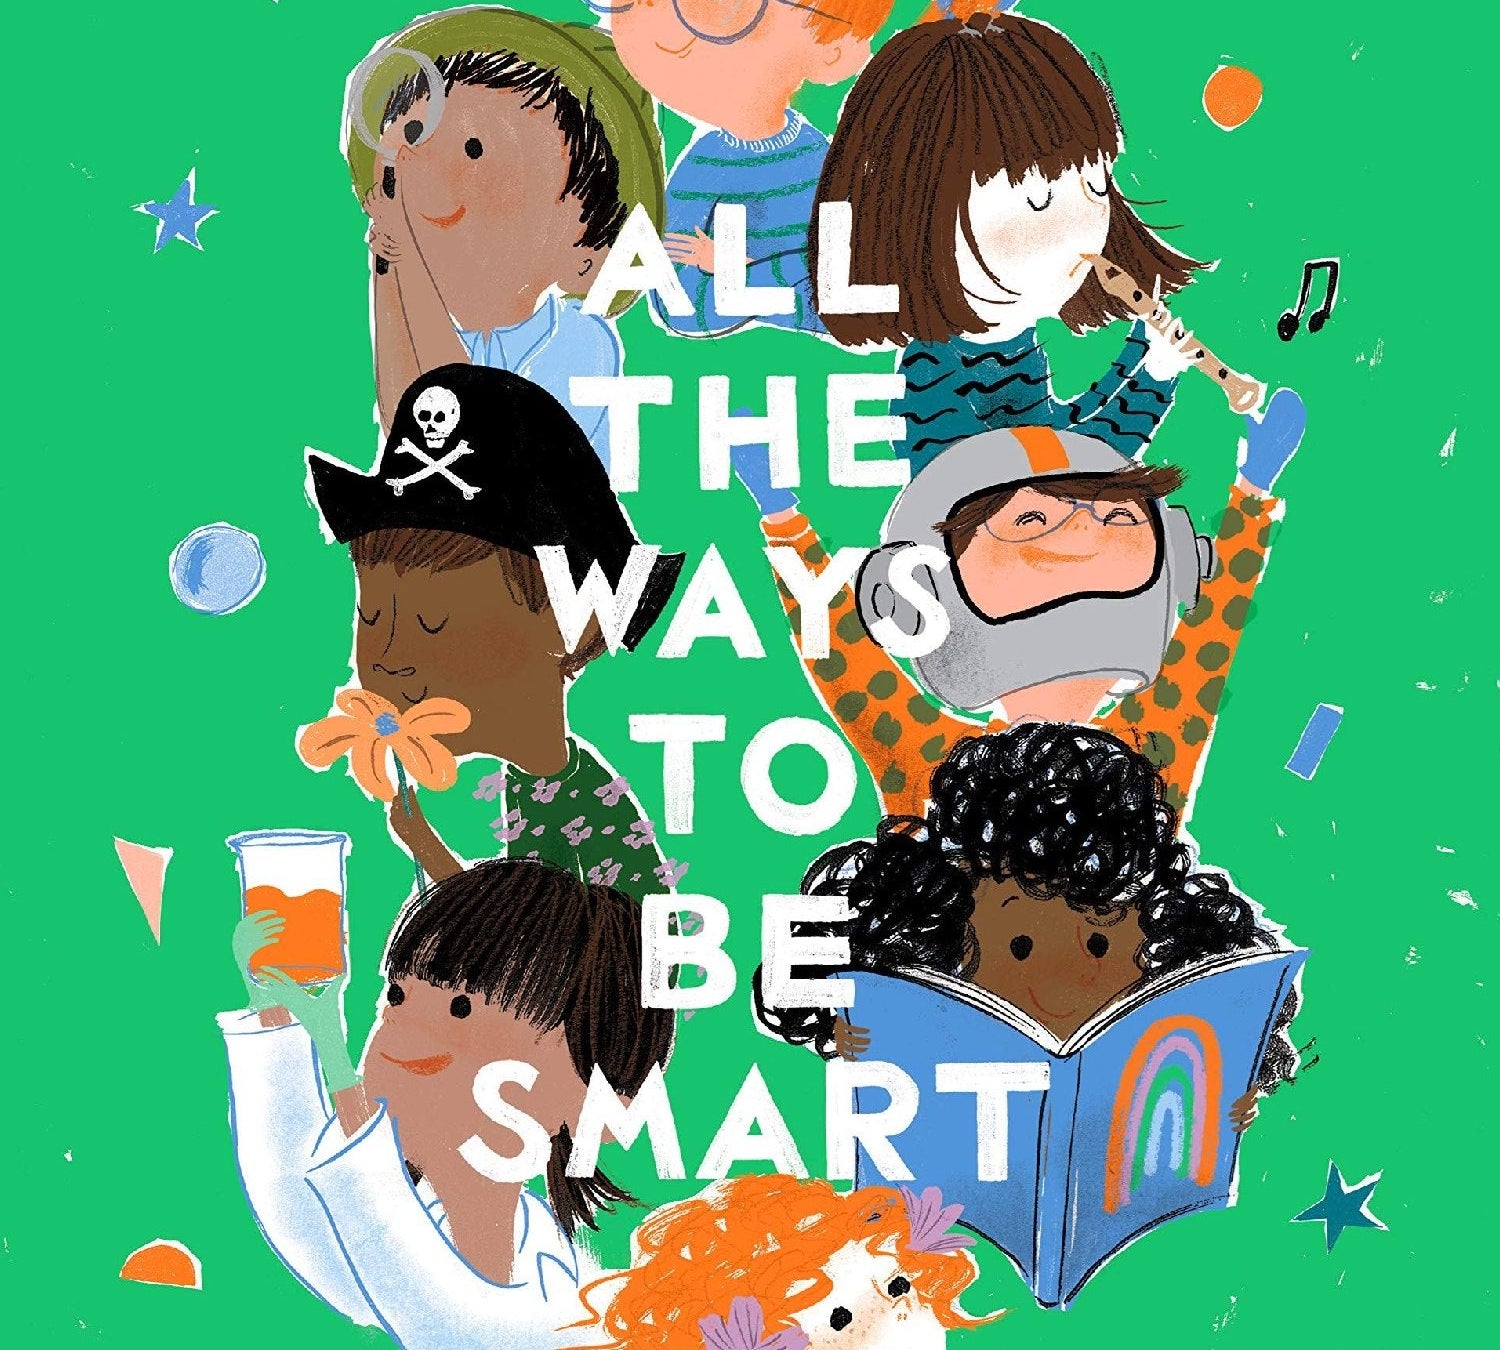 Maypole LaneBook - All The Ways To Be Smart - Maypole LaneMaypole LaneBook - All The Ways To Be Smart